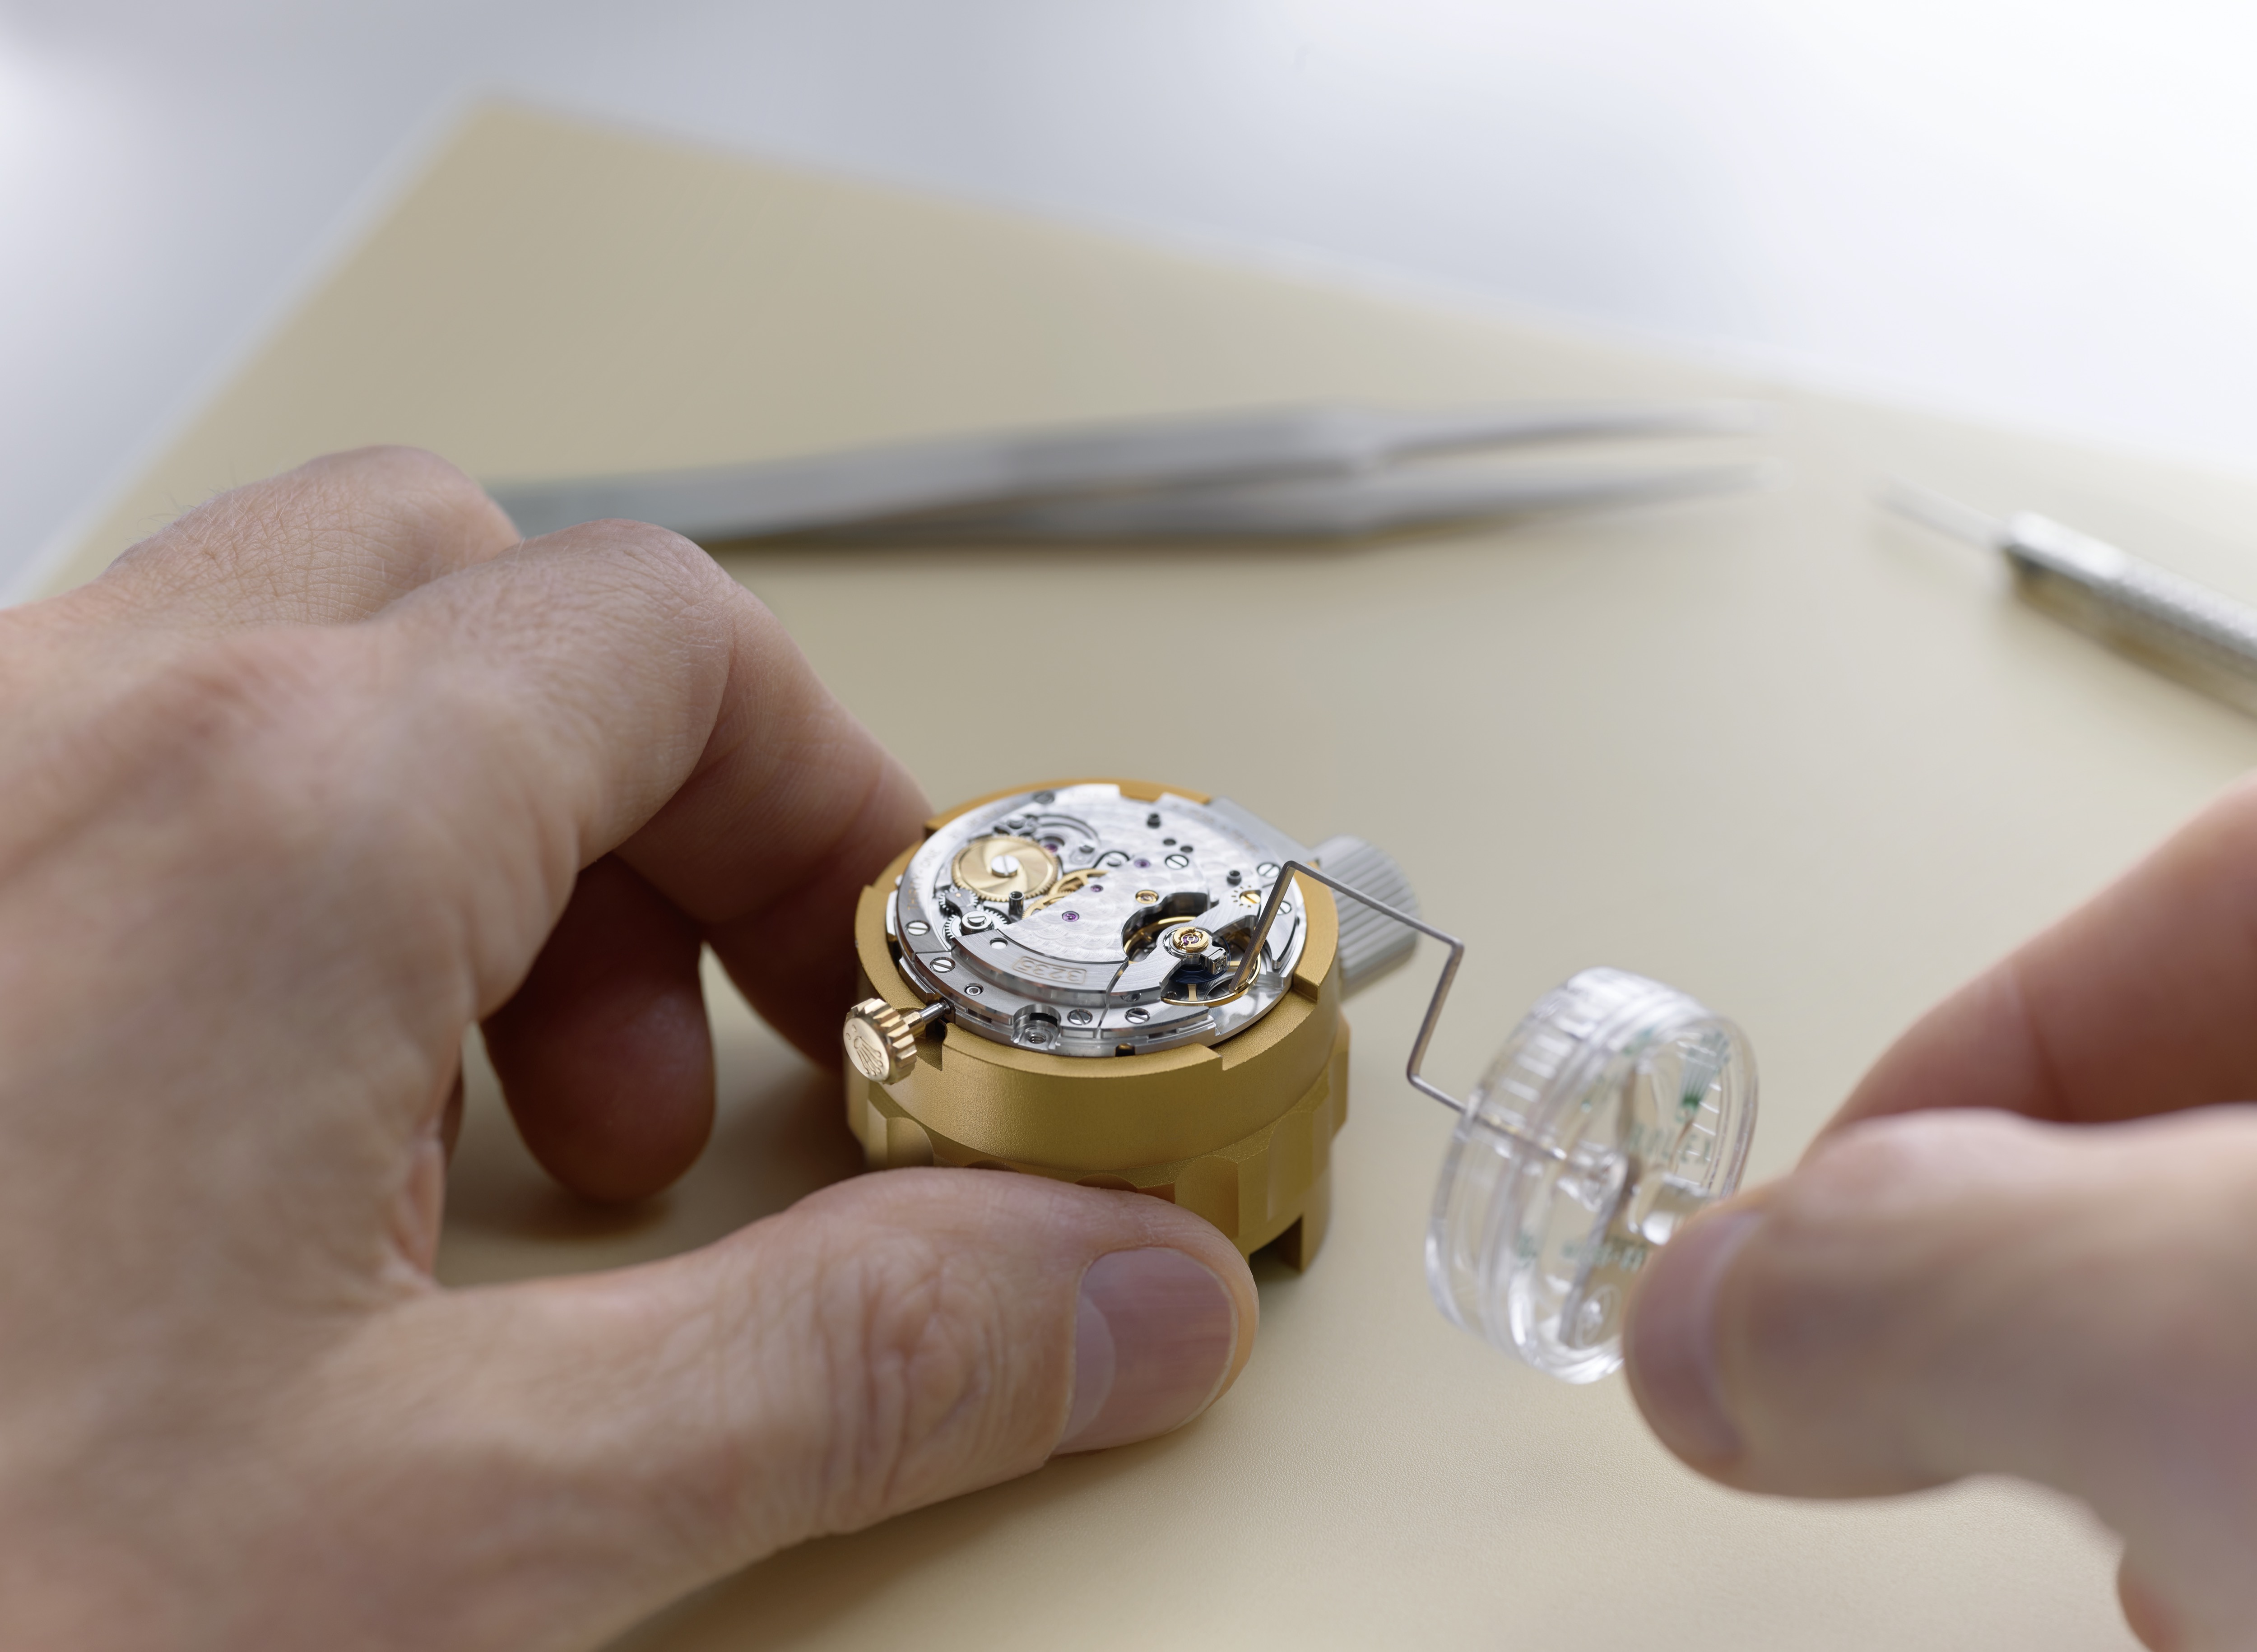 8. THE MOVEMENTS TIMEKEEPING ACCURACY IS ADJUSTED USING A MICROSTELLA REGULATING KEY